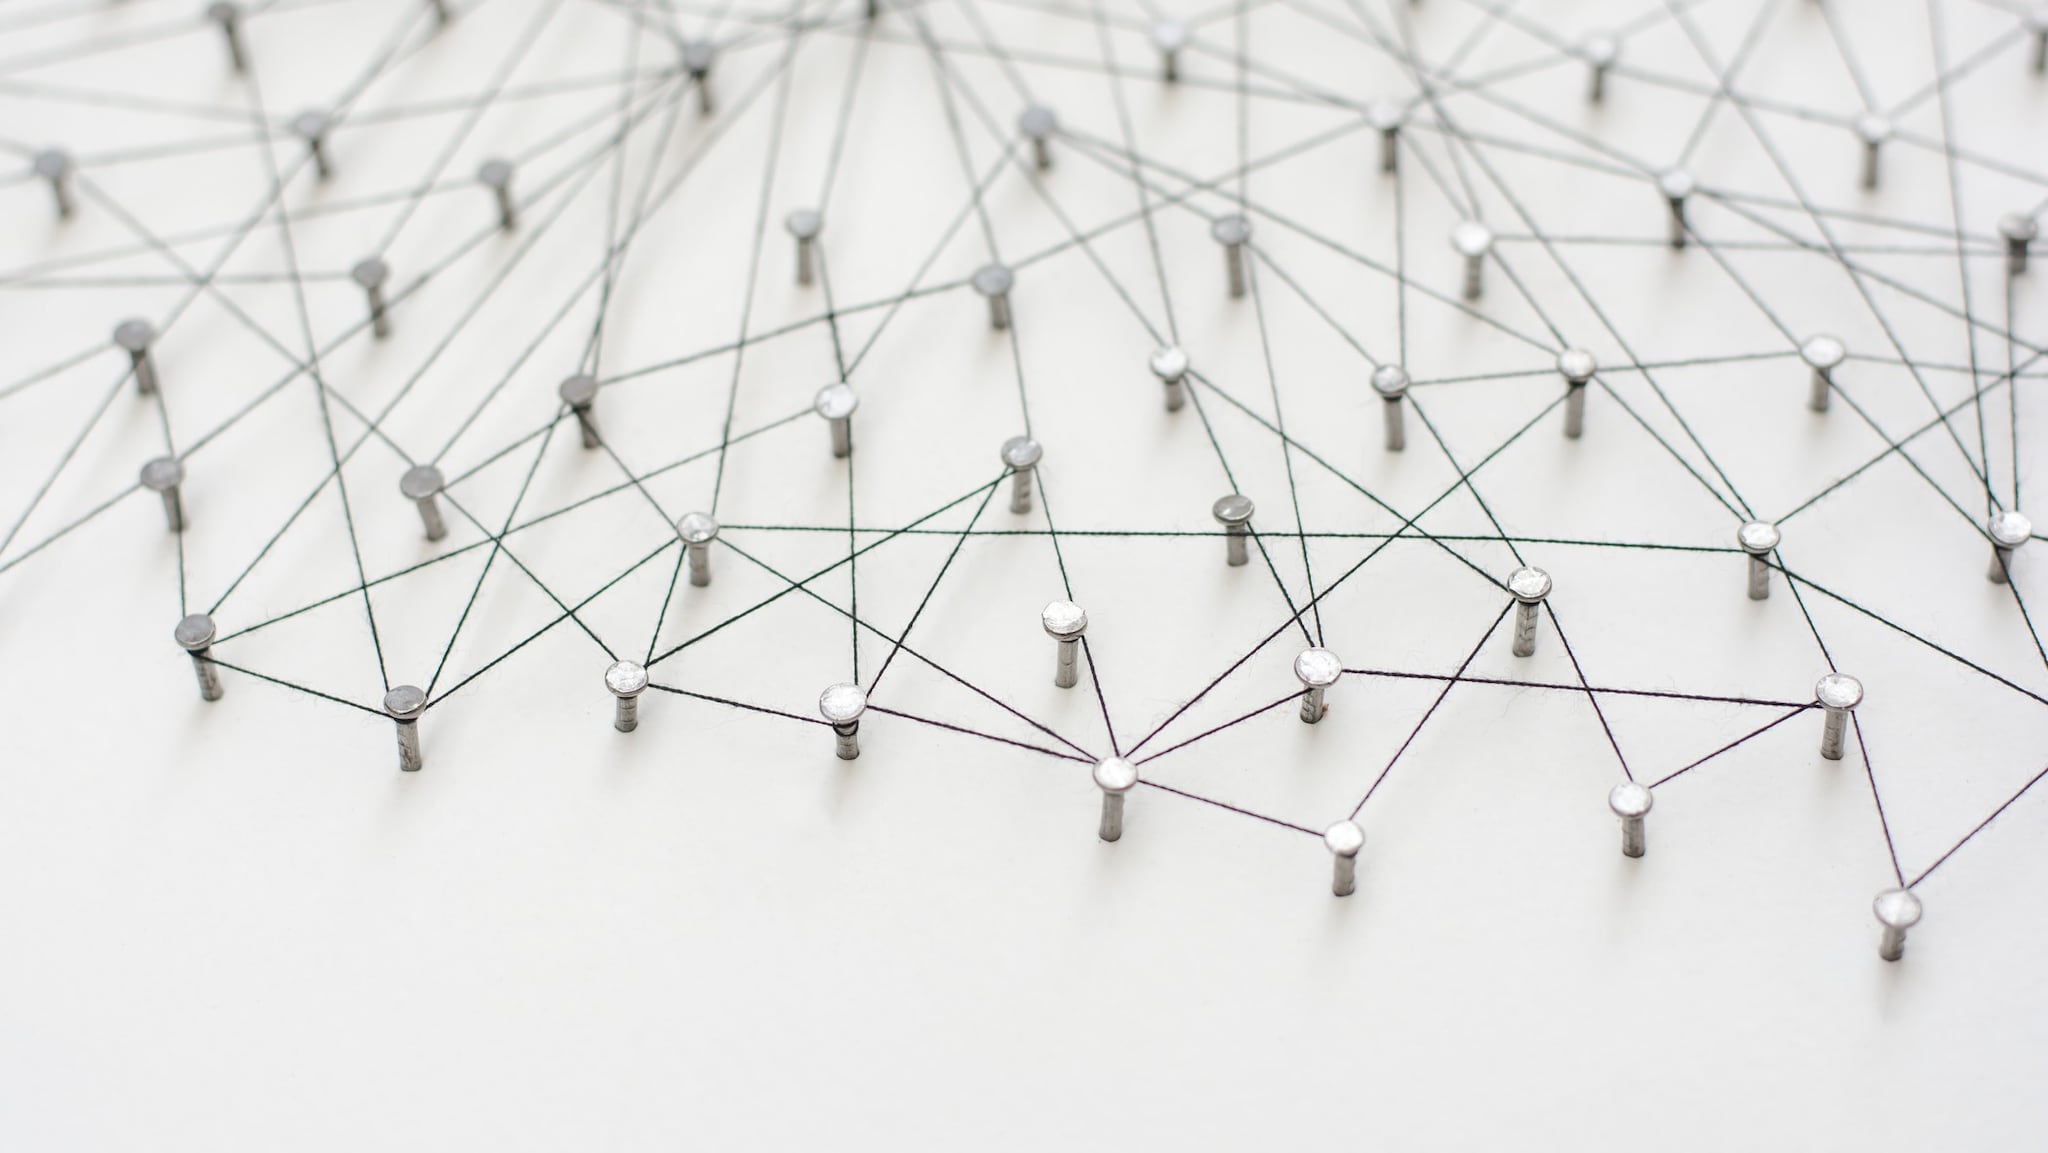 Pins connected by wires to symbolize a network